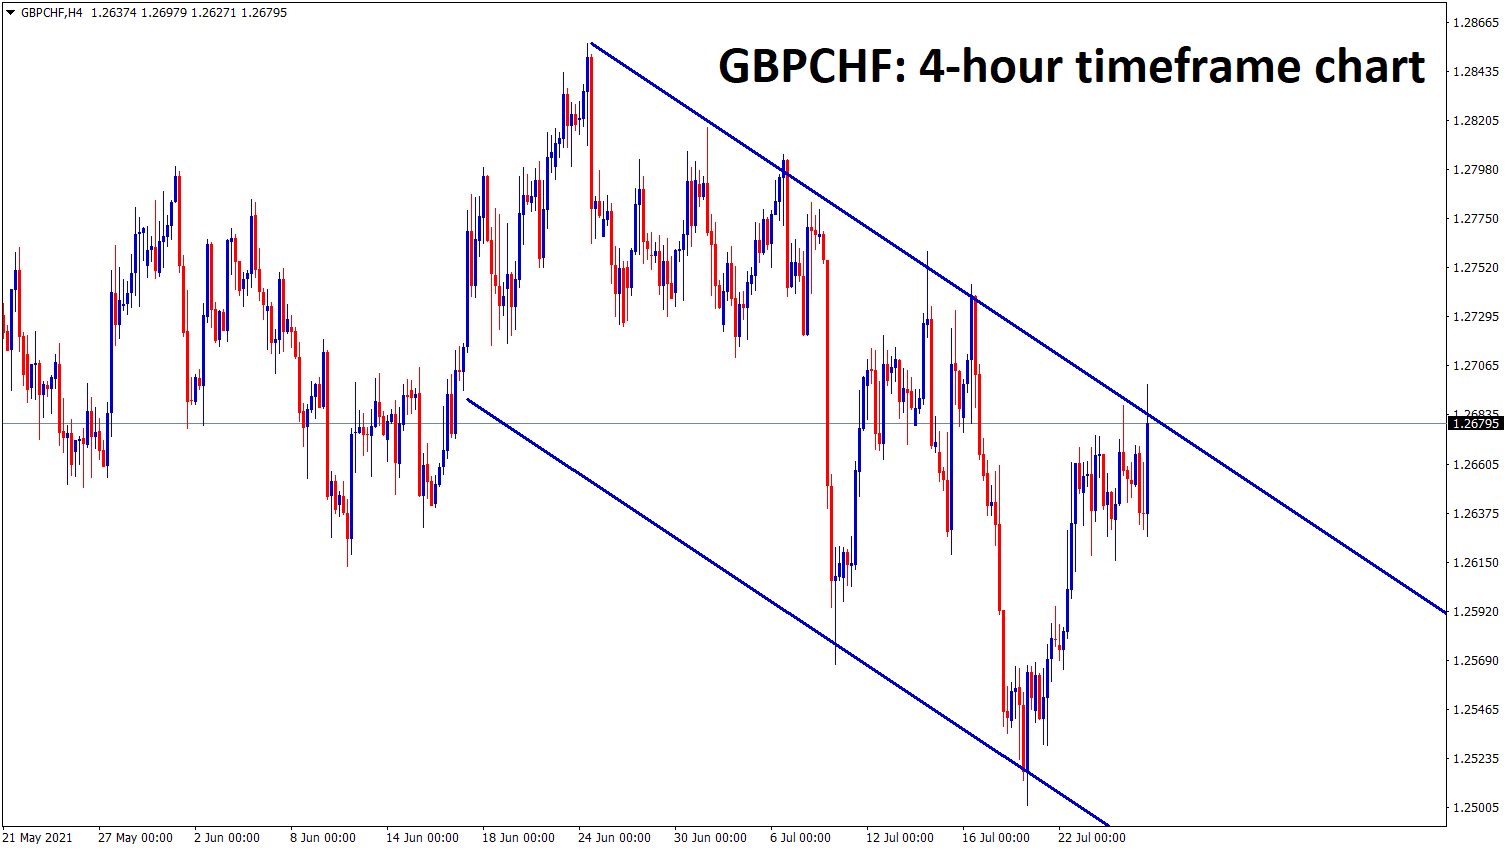 GBPCHF is moving in a descending channel wait for the breakout or reversal confirmation